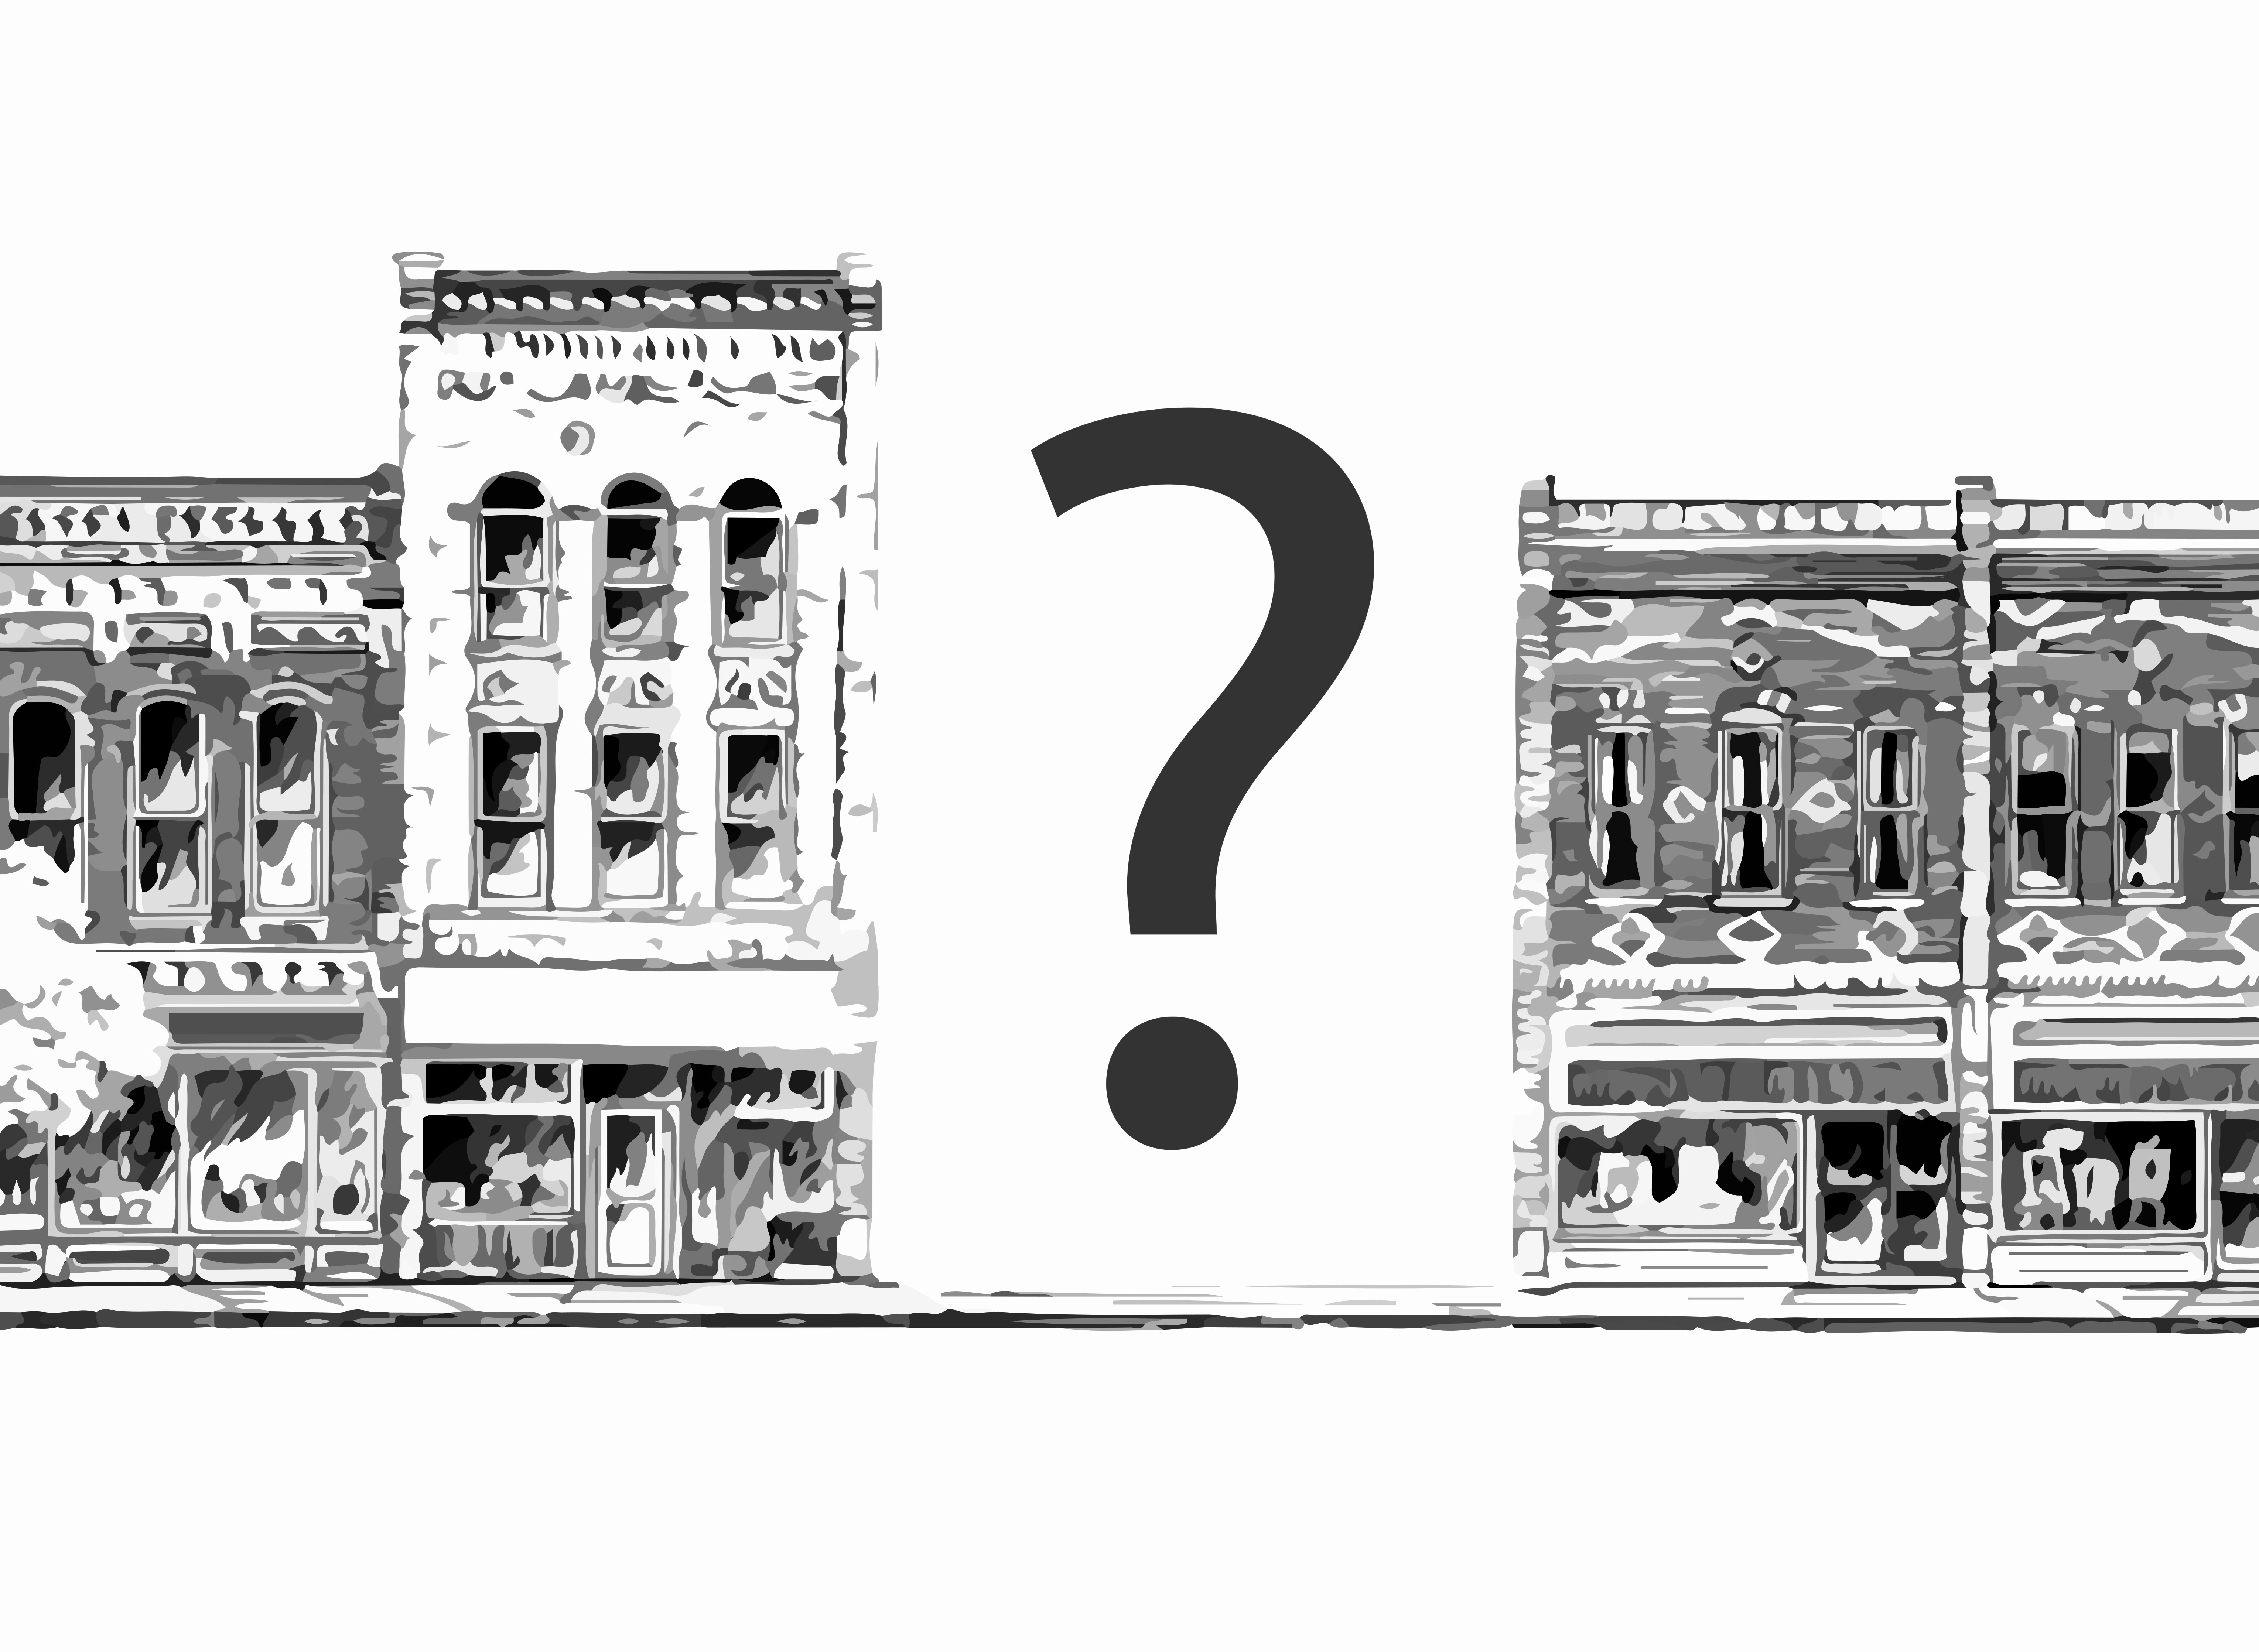 What Do We Need in Downtown Corning?